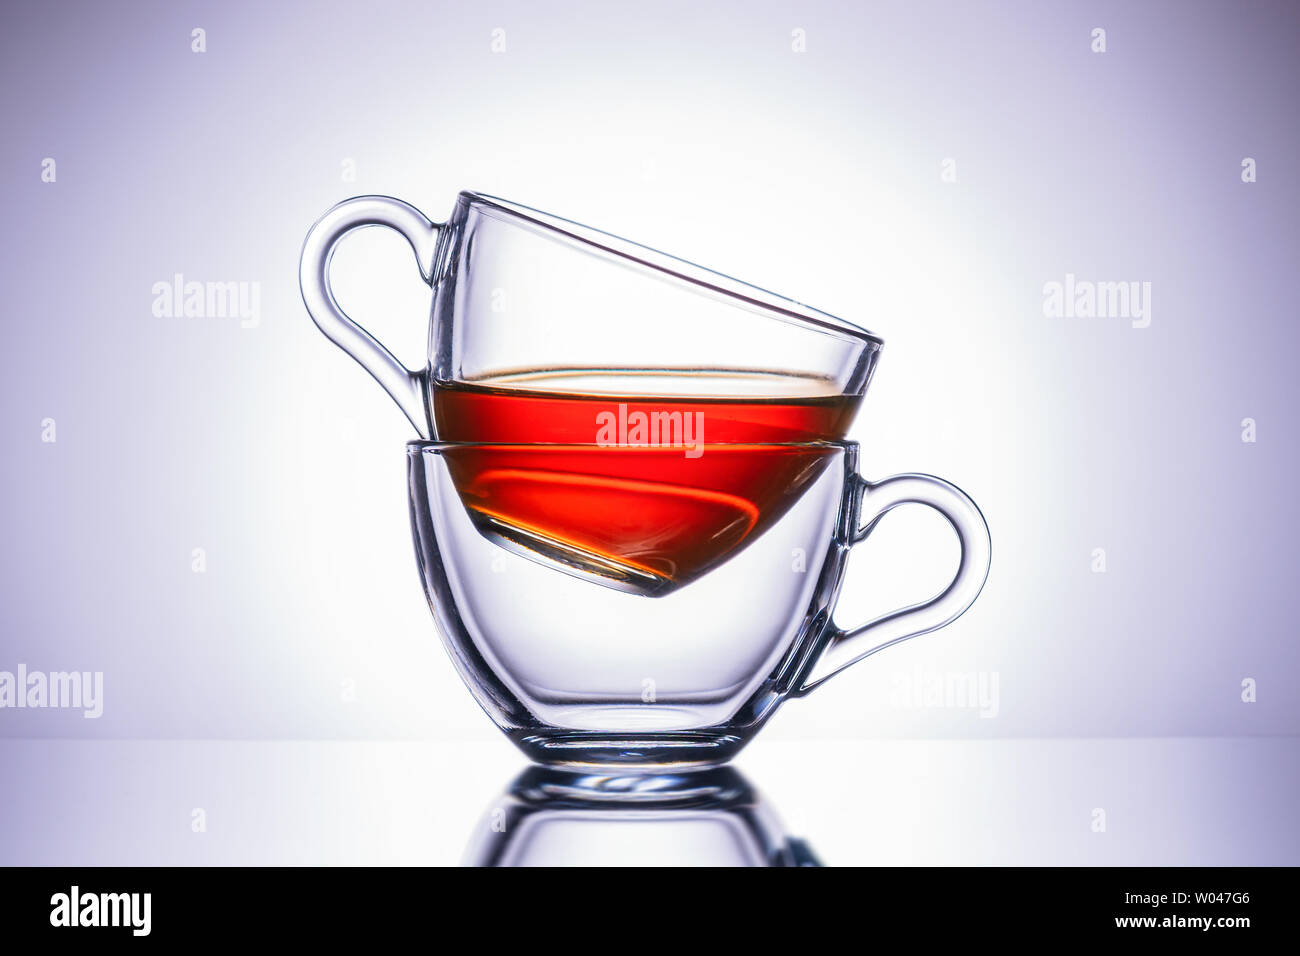 Two transparent mugs of tea. Central location, close-up. Stock Photo